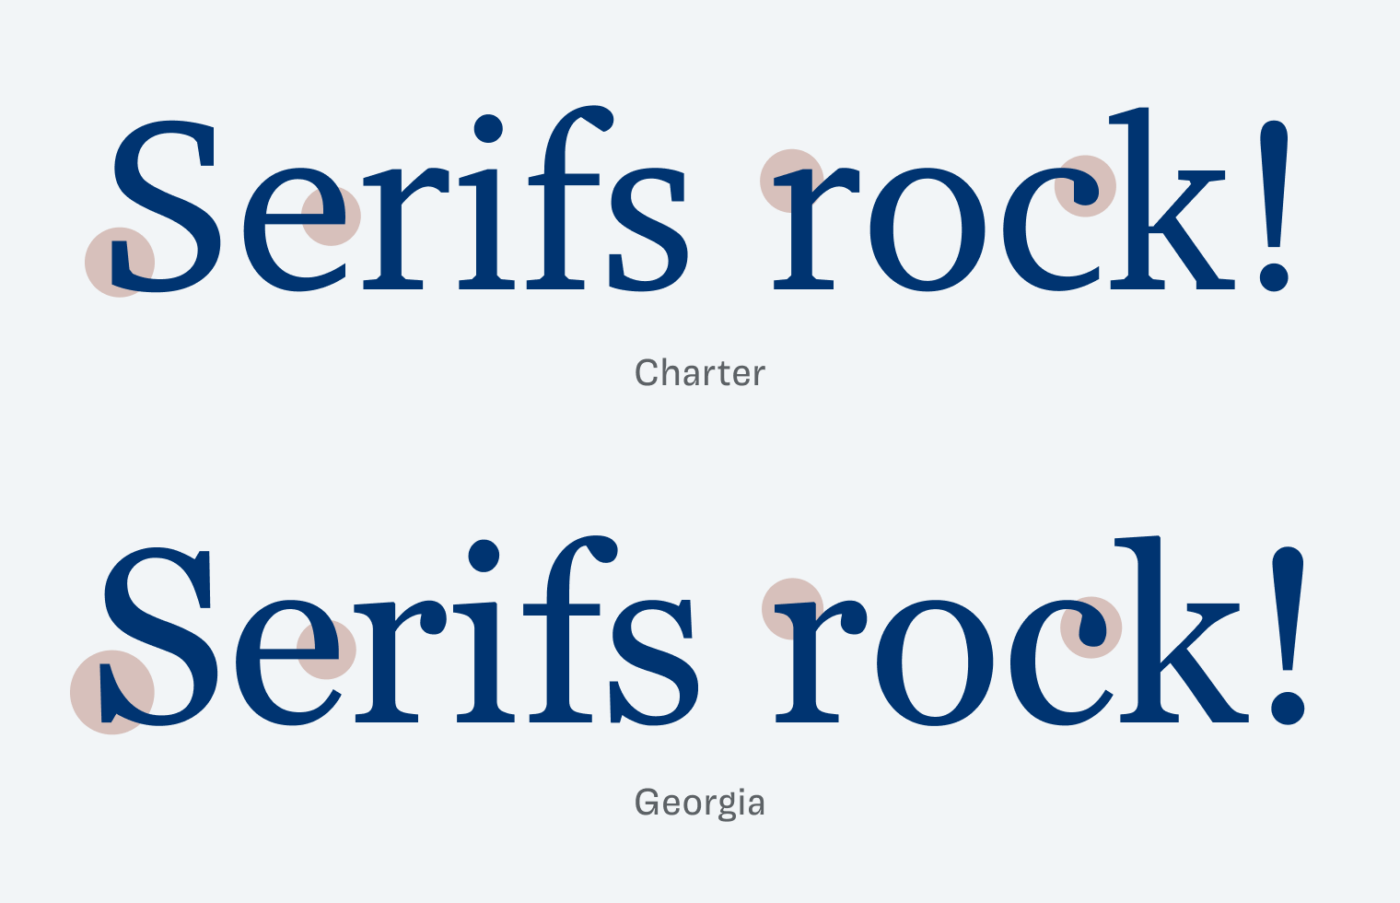 Comparing the serifs of Charter and Georgia.